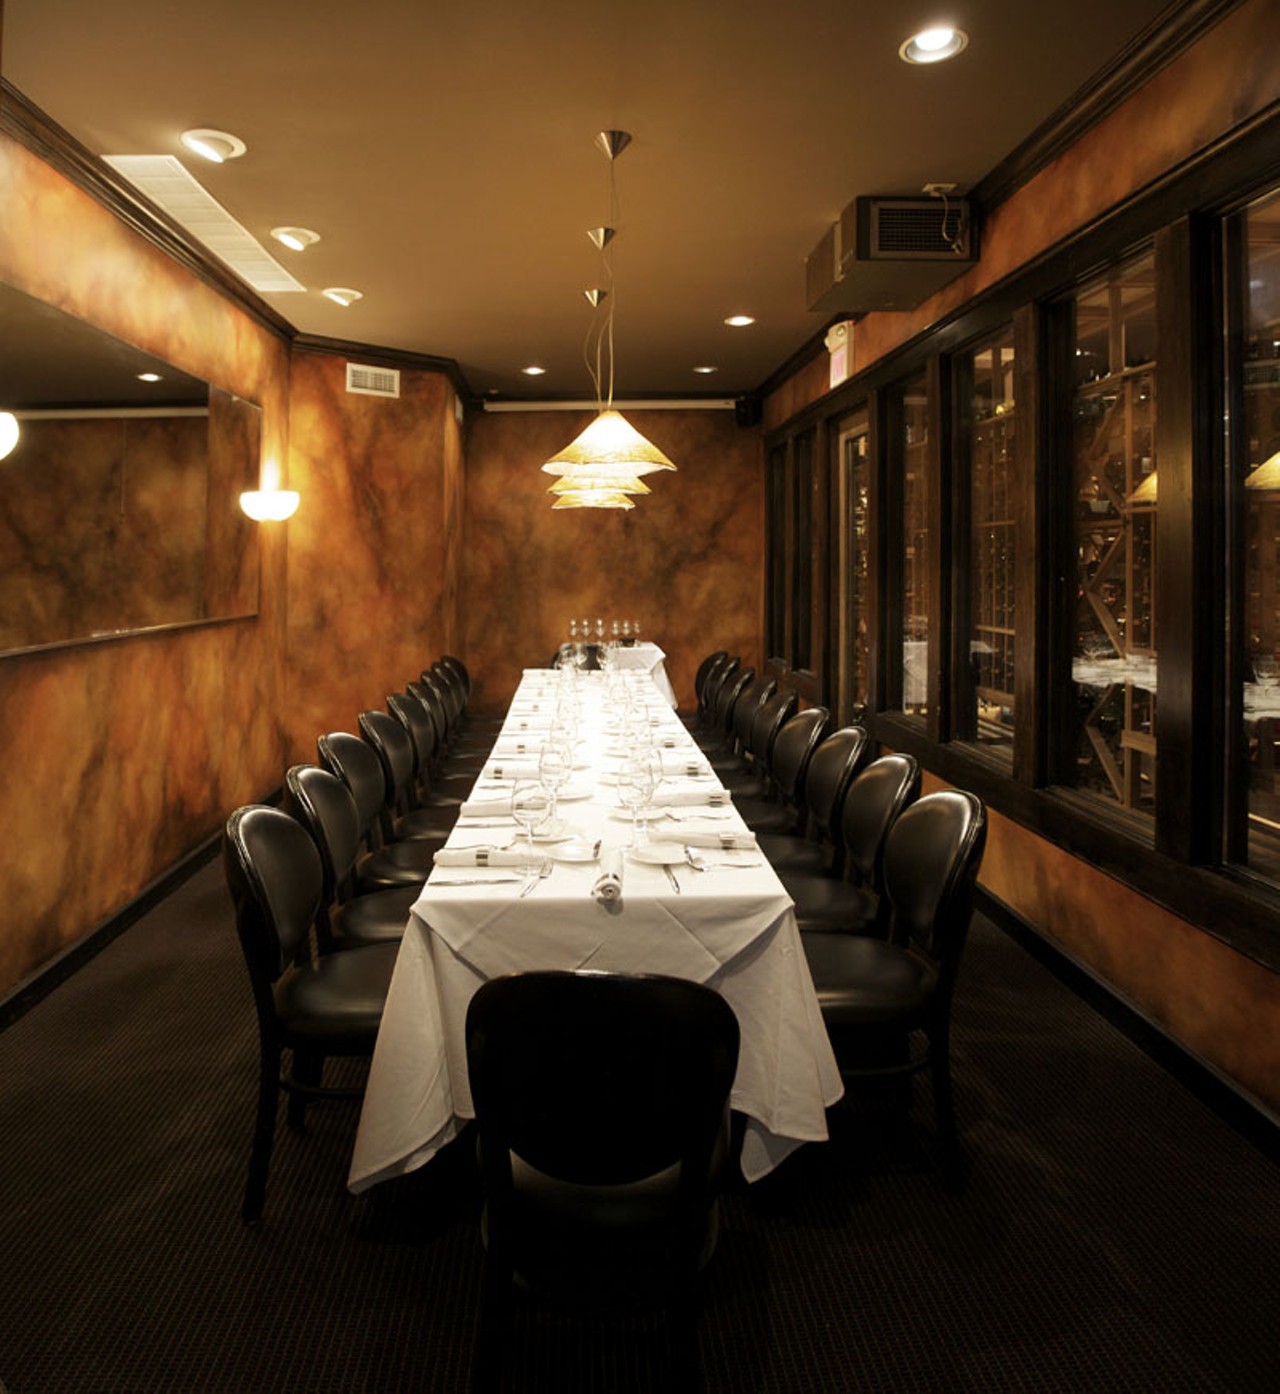 The wine room, a private dining room adjacent to the main dining room, seats 20 guests.